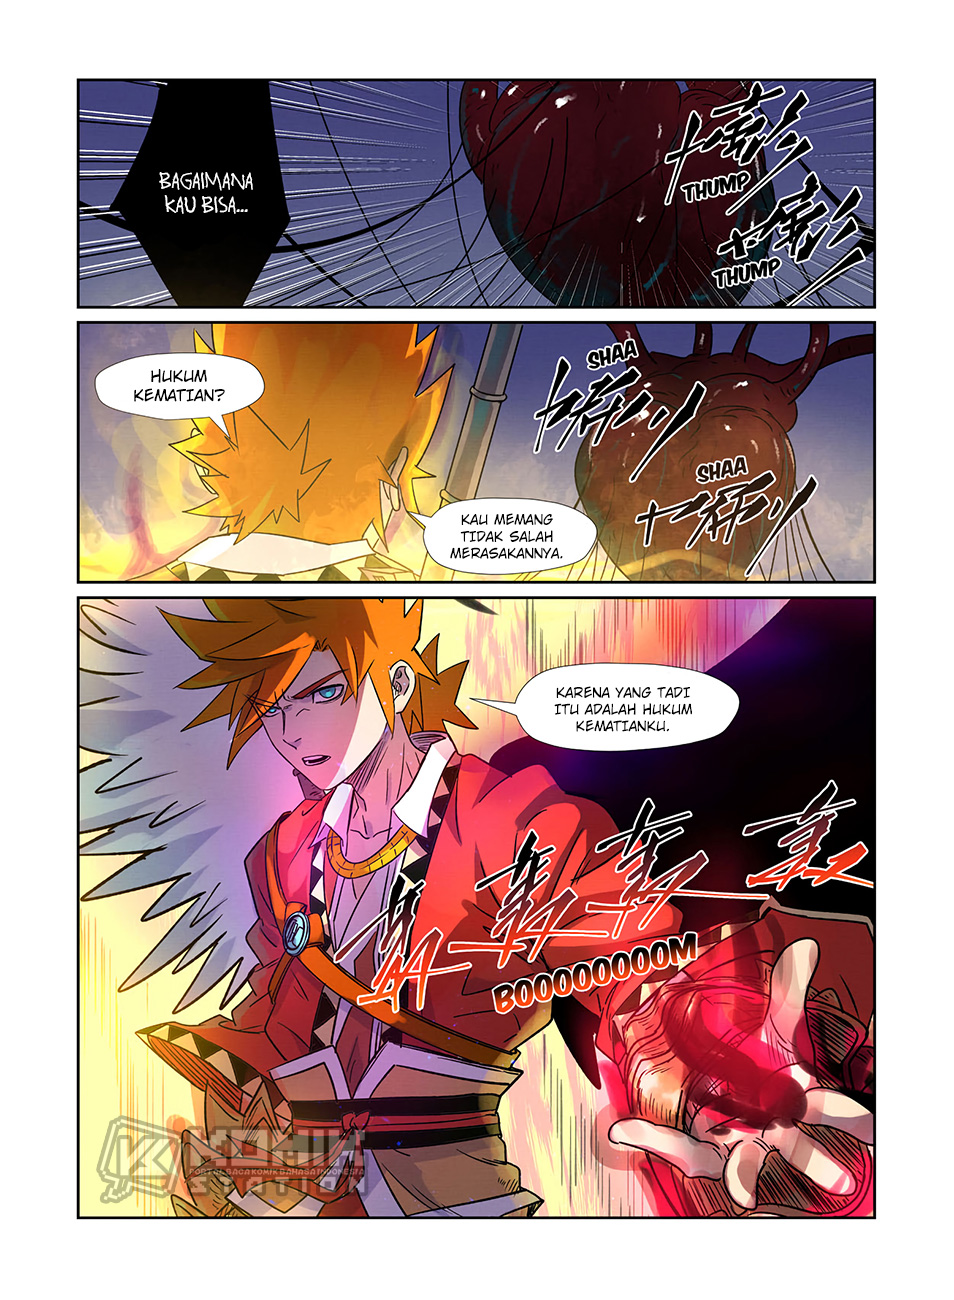 Tales of Demons and Gods Chapter 271-5